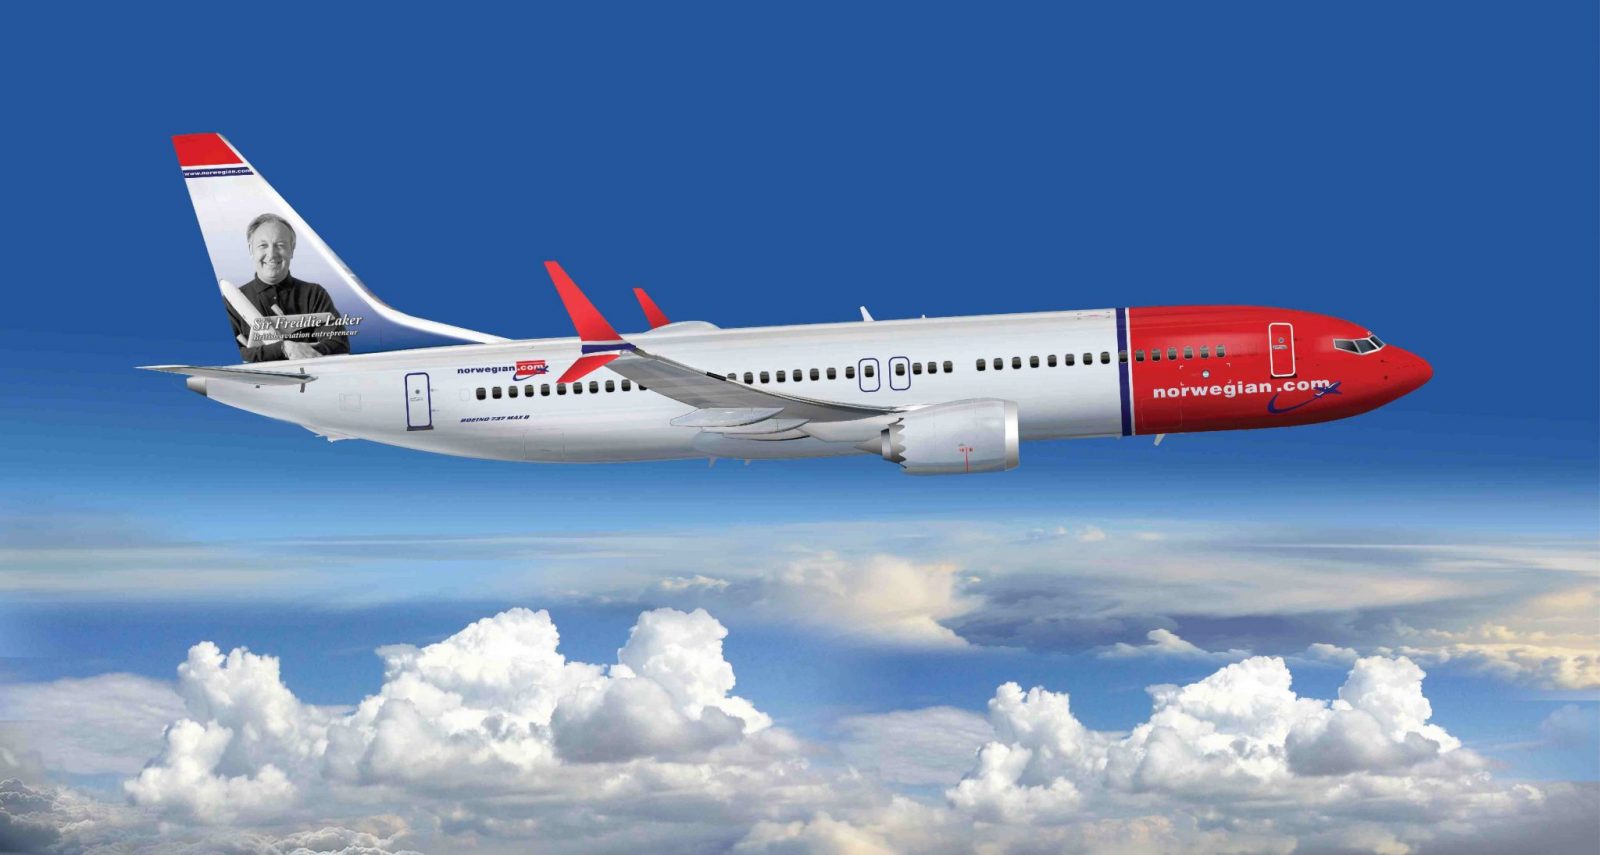 A Low-Cost Airline is Coming to Argentina. Norwegian Air Shuttle Plans Services This Year